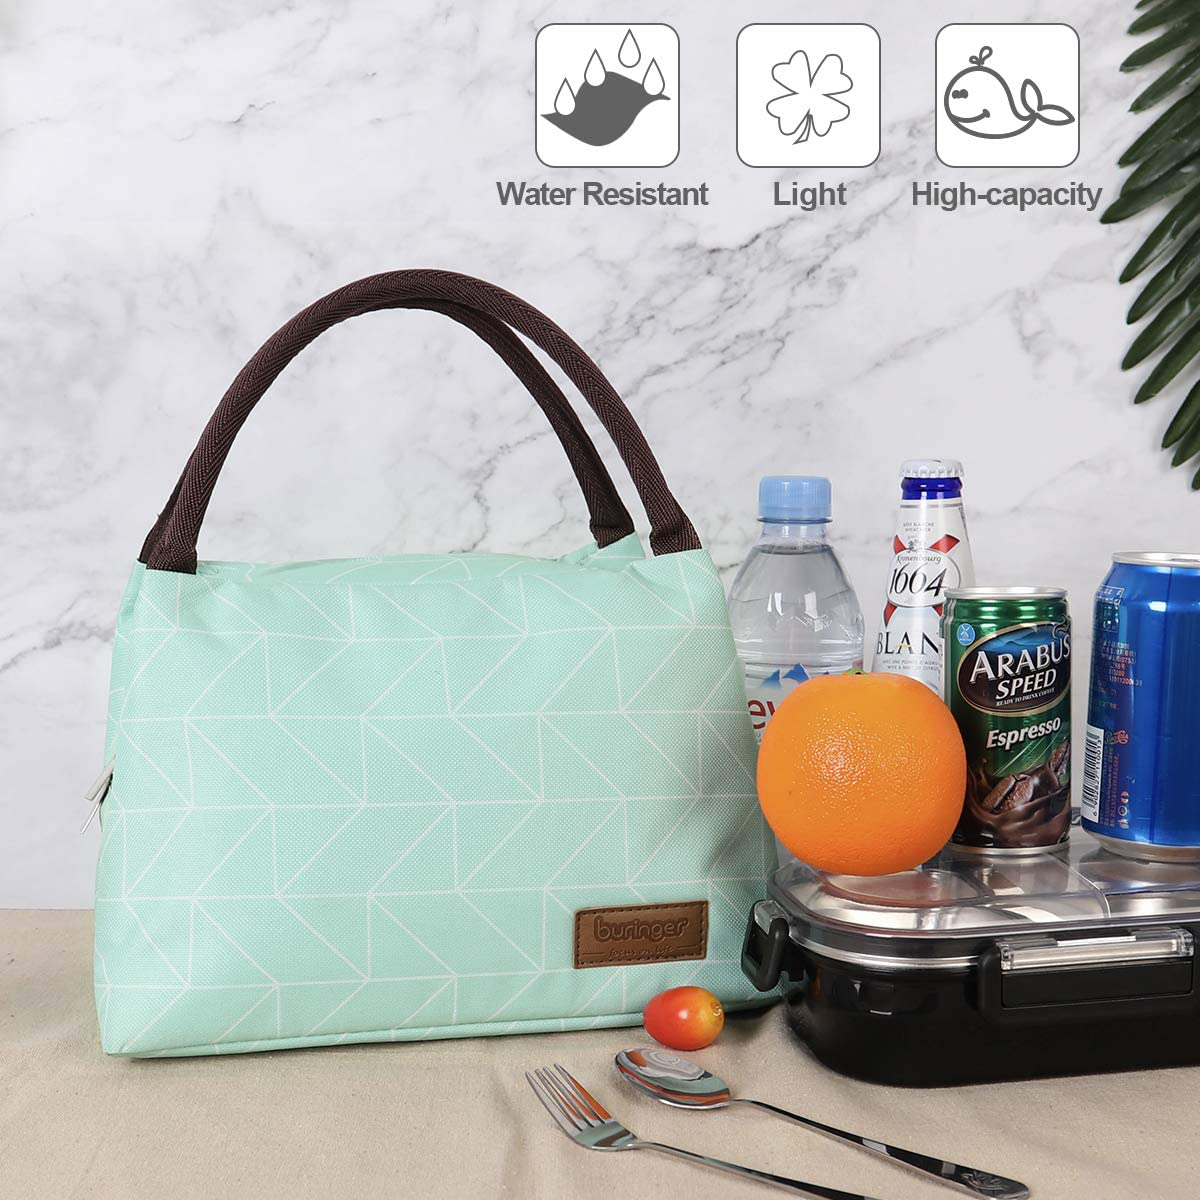 Buringer Reusable Insulated Lunch Bag Cooler Tote Box Meal Prep for Men & Women Work Picnic or Travel （Grey White Stripes）